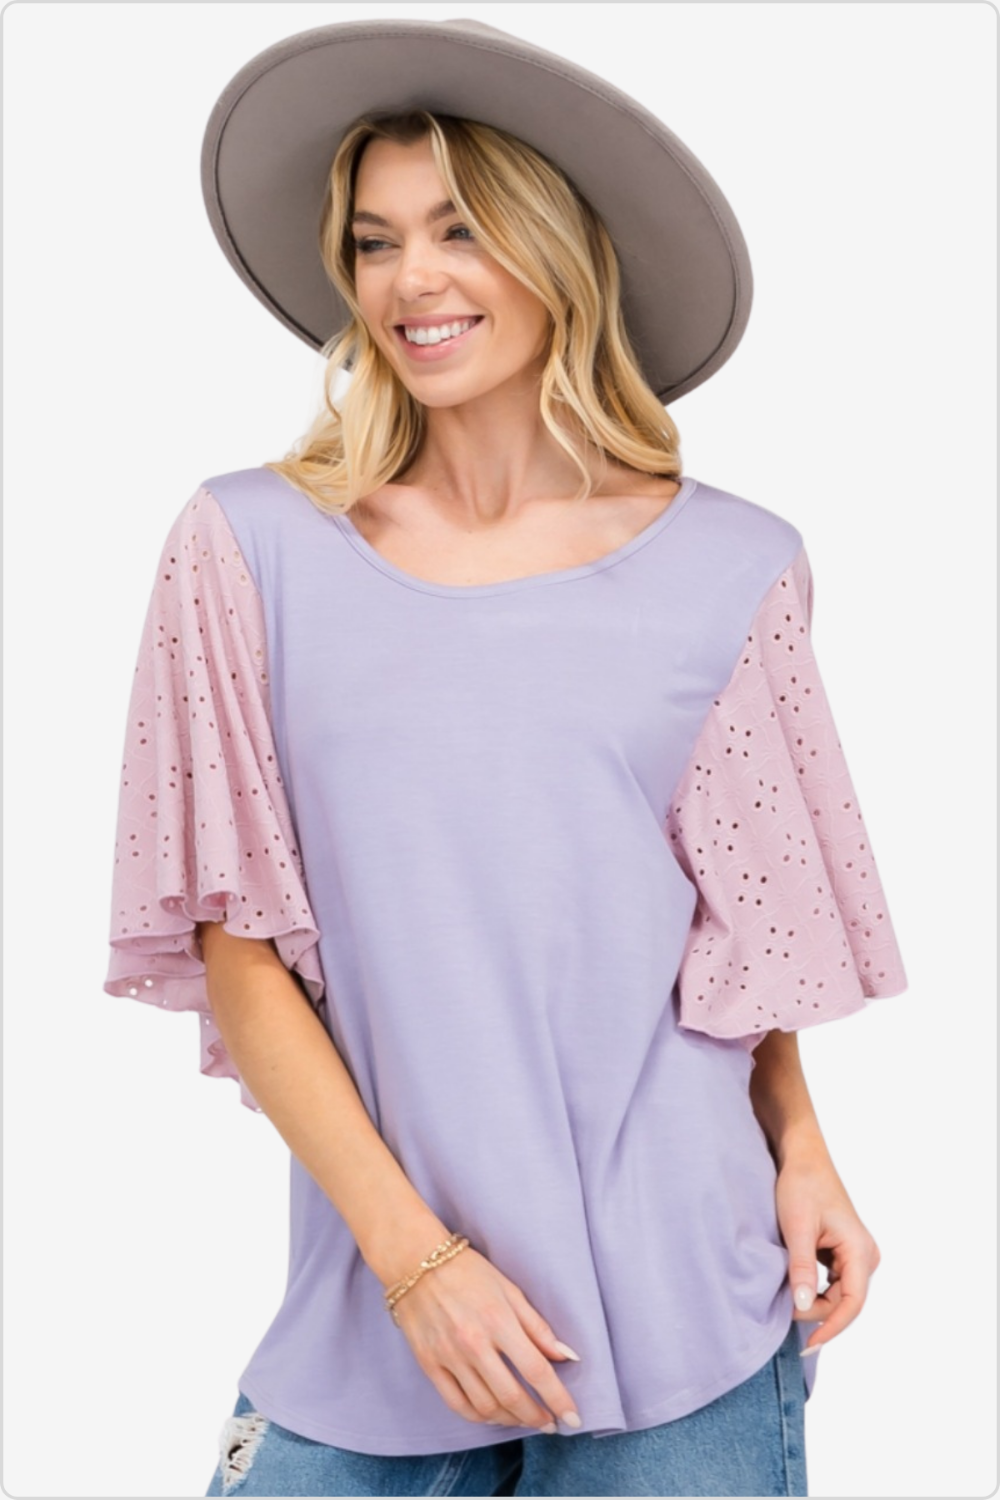 Joyful woman in lavender blouse with pink eyelet sleeves and a wide-brim hat, stylish summer look.